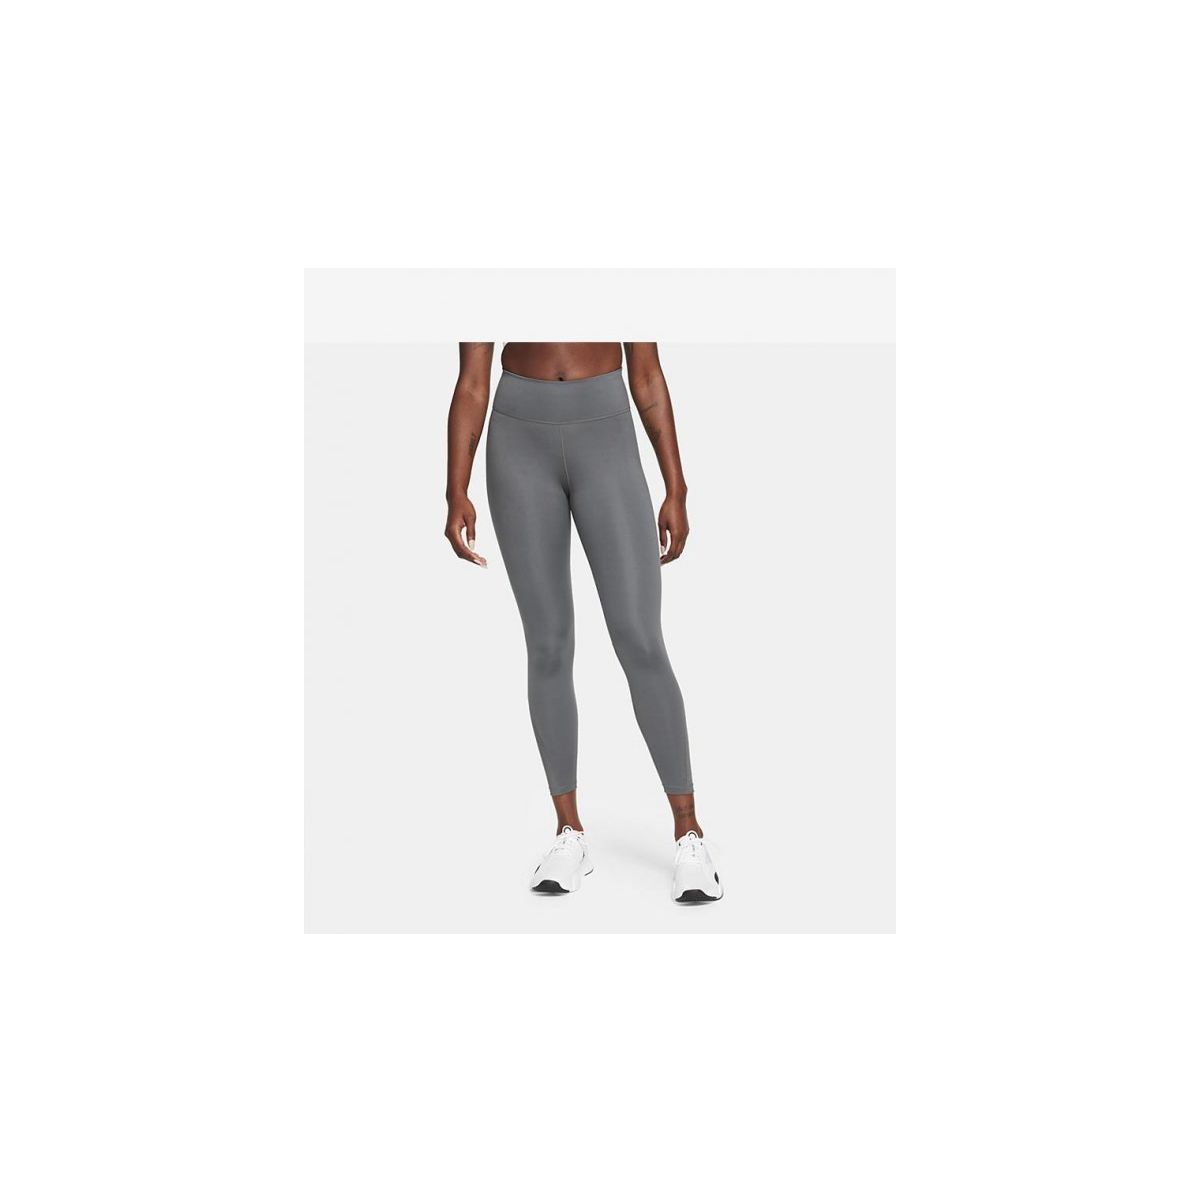 Nike Dd0249-010 One Mid-rise 7/8 Tights Women's Tights - Trendyol